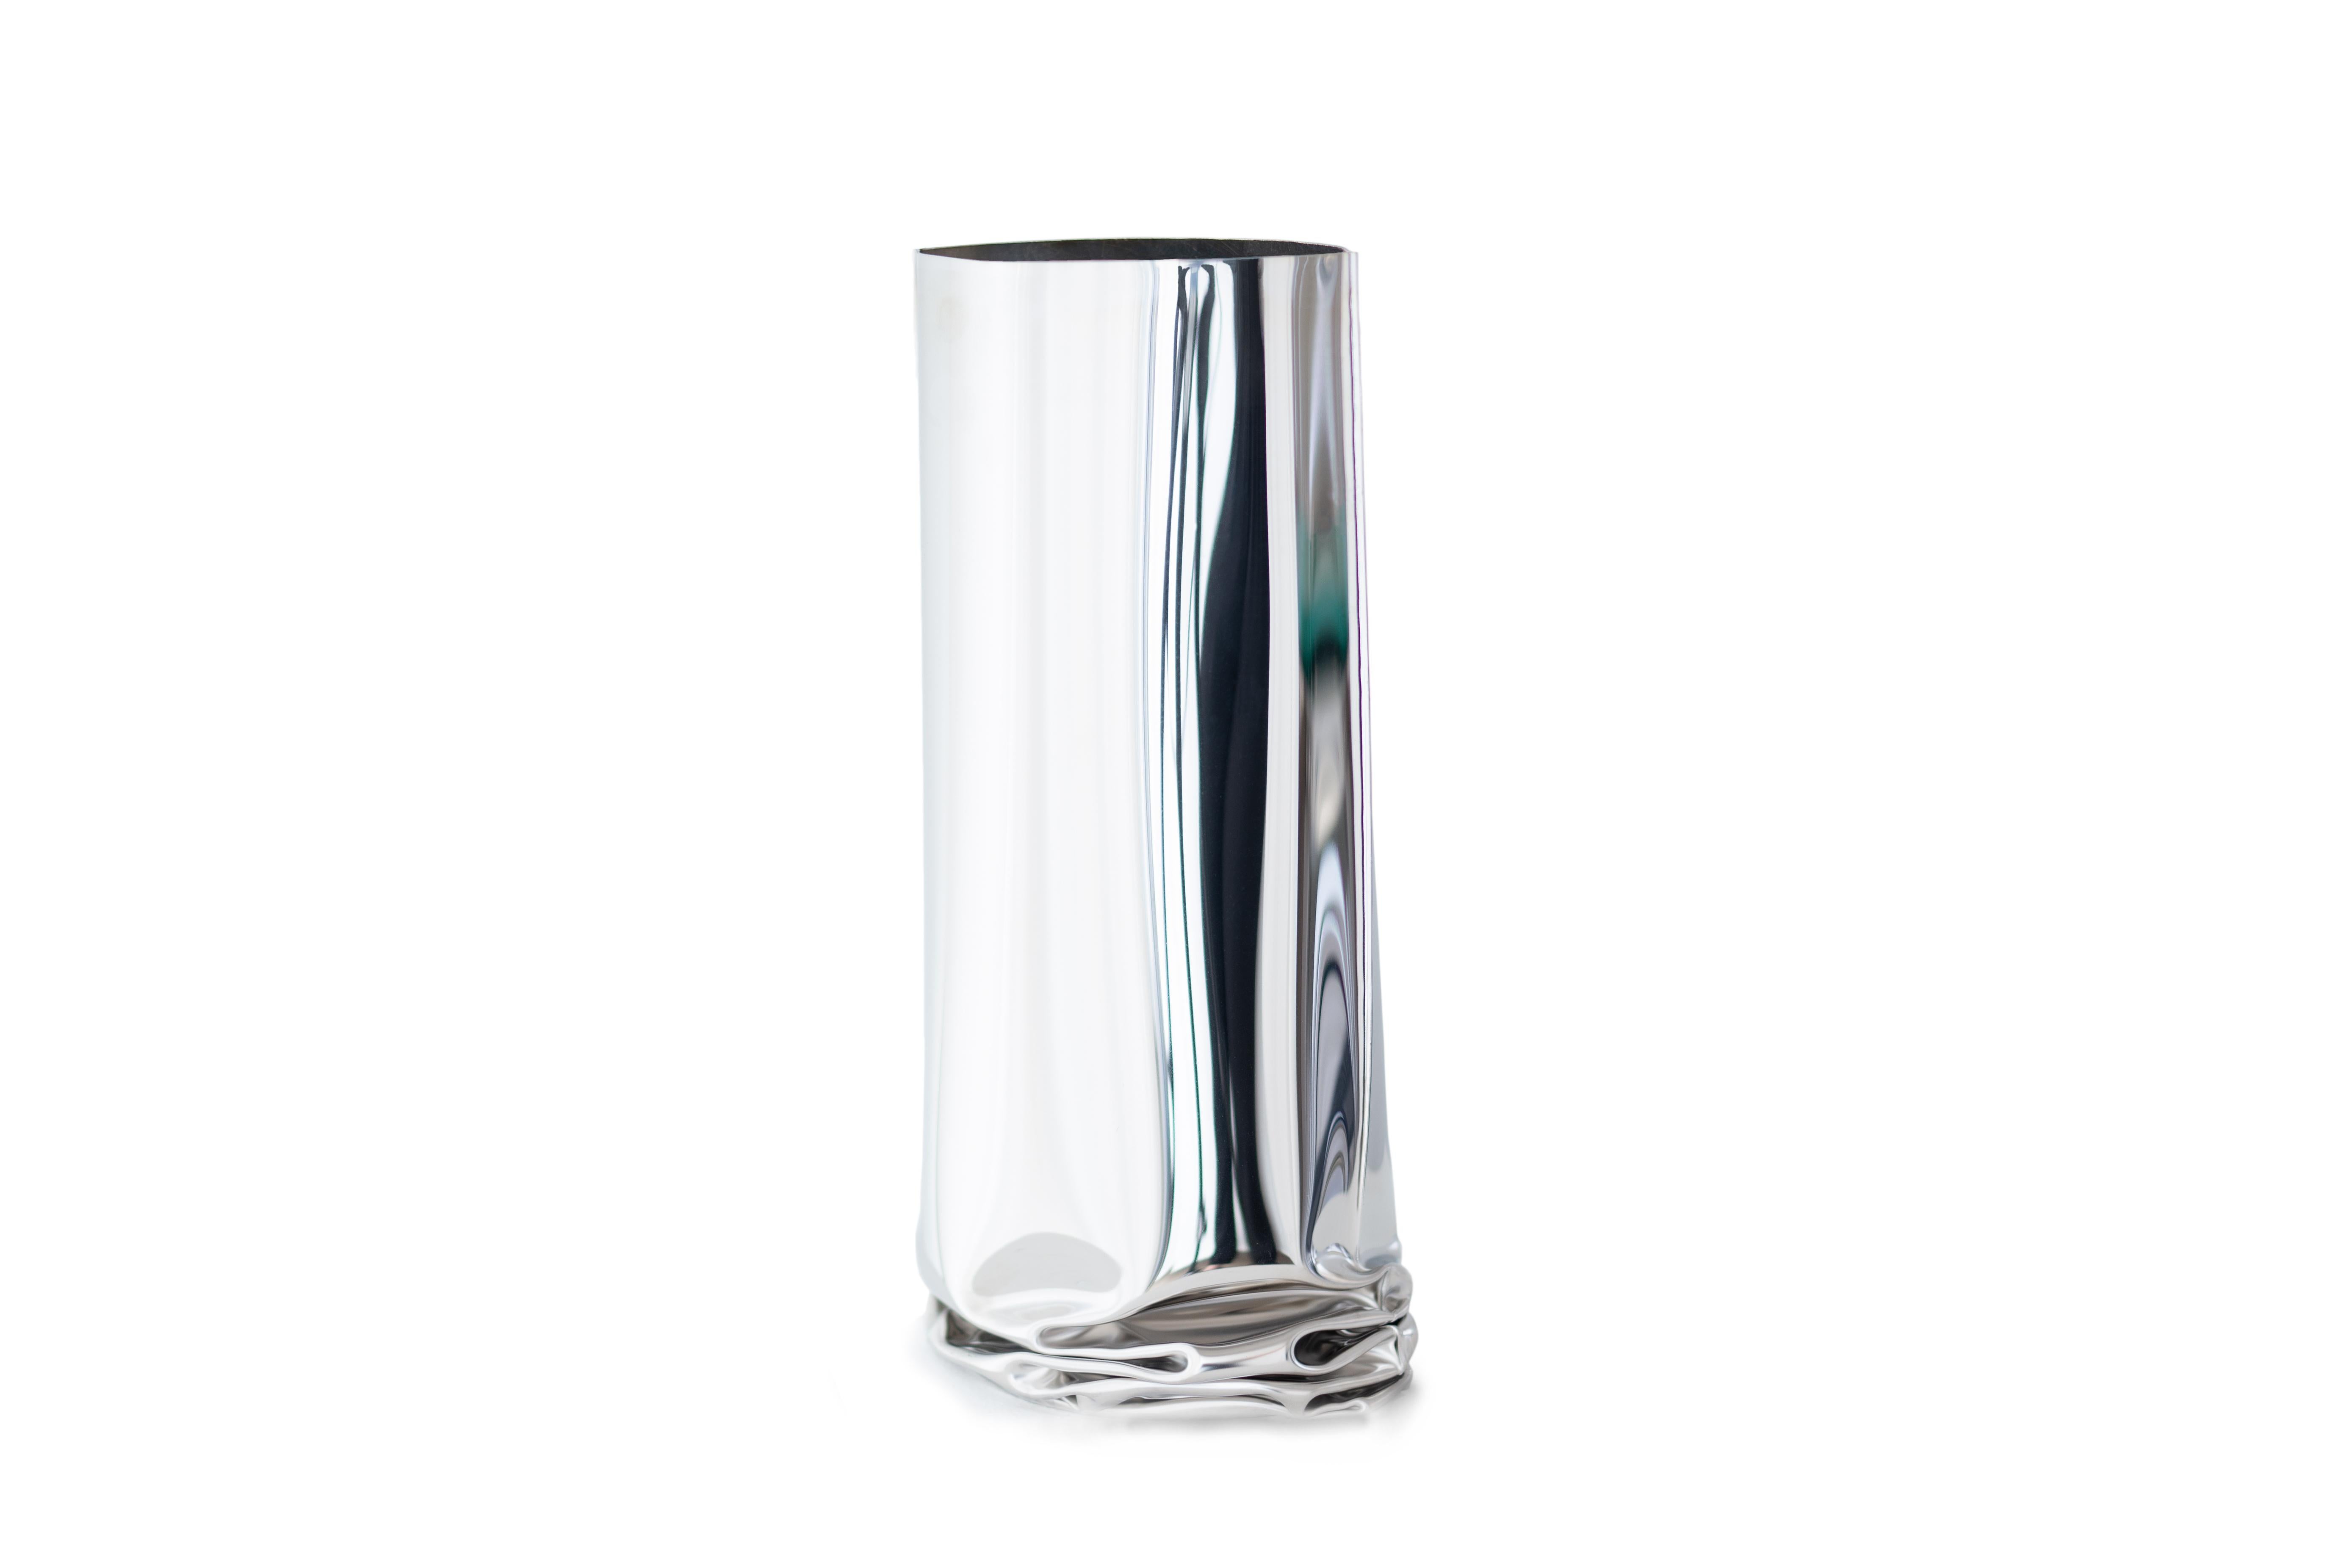 Contemporary Vase, 'Crash Vase' by Zieta, Small, Stainless Steel In New Condition For Sale In Paris, FR